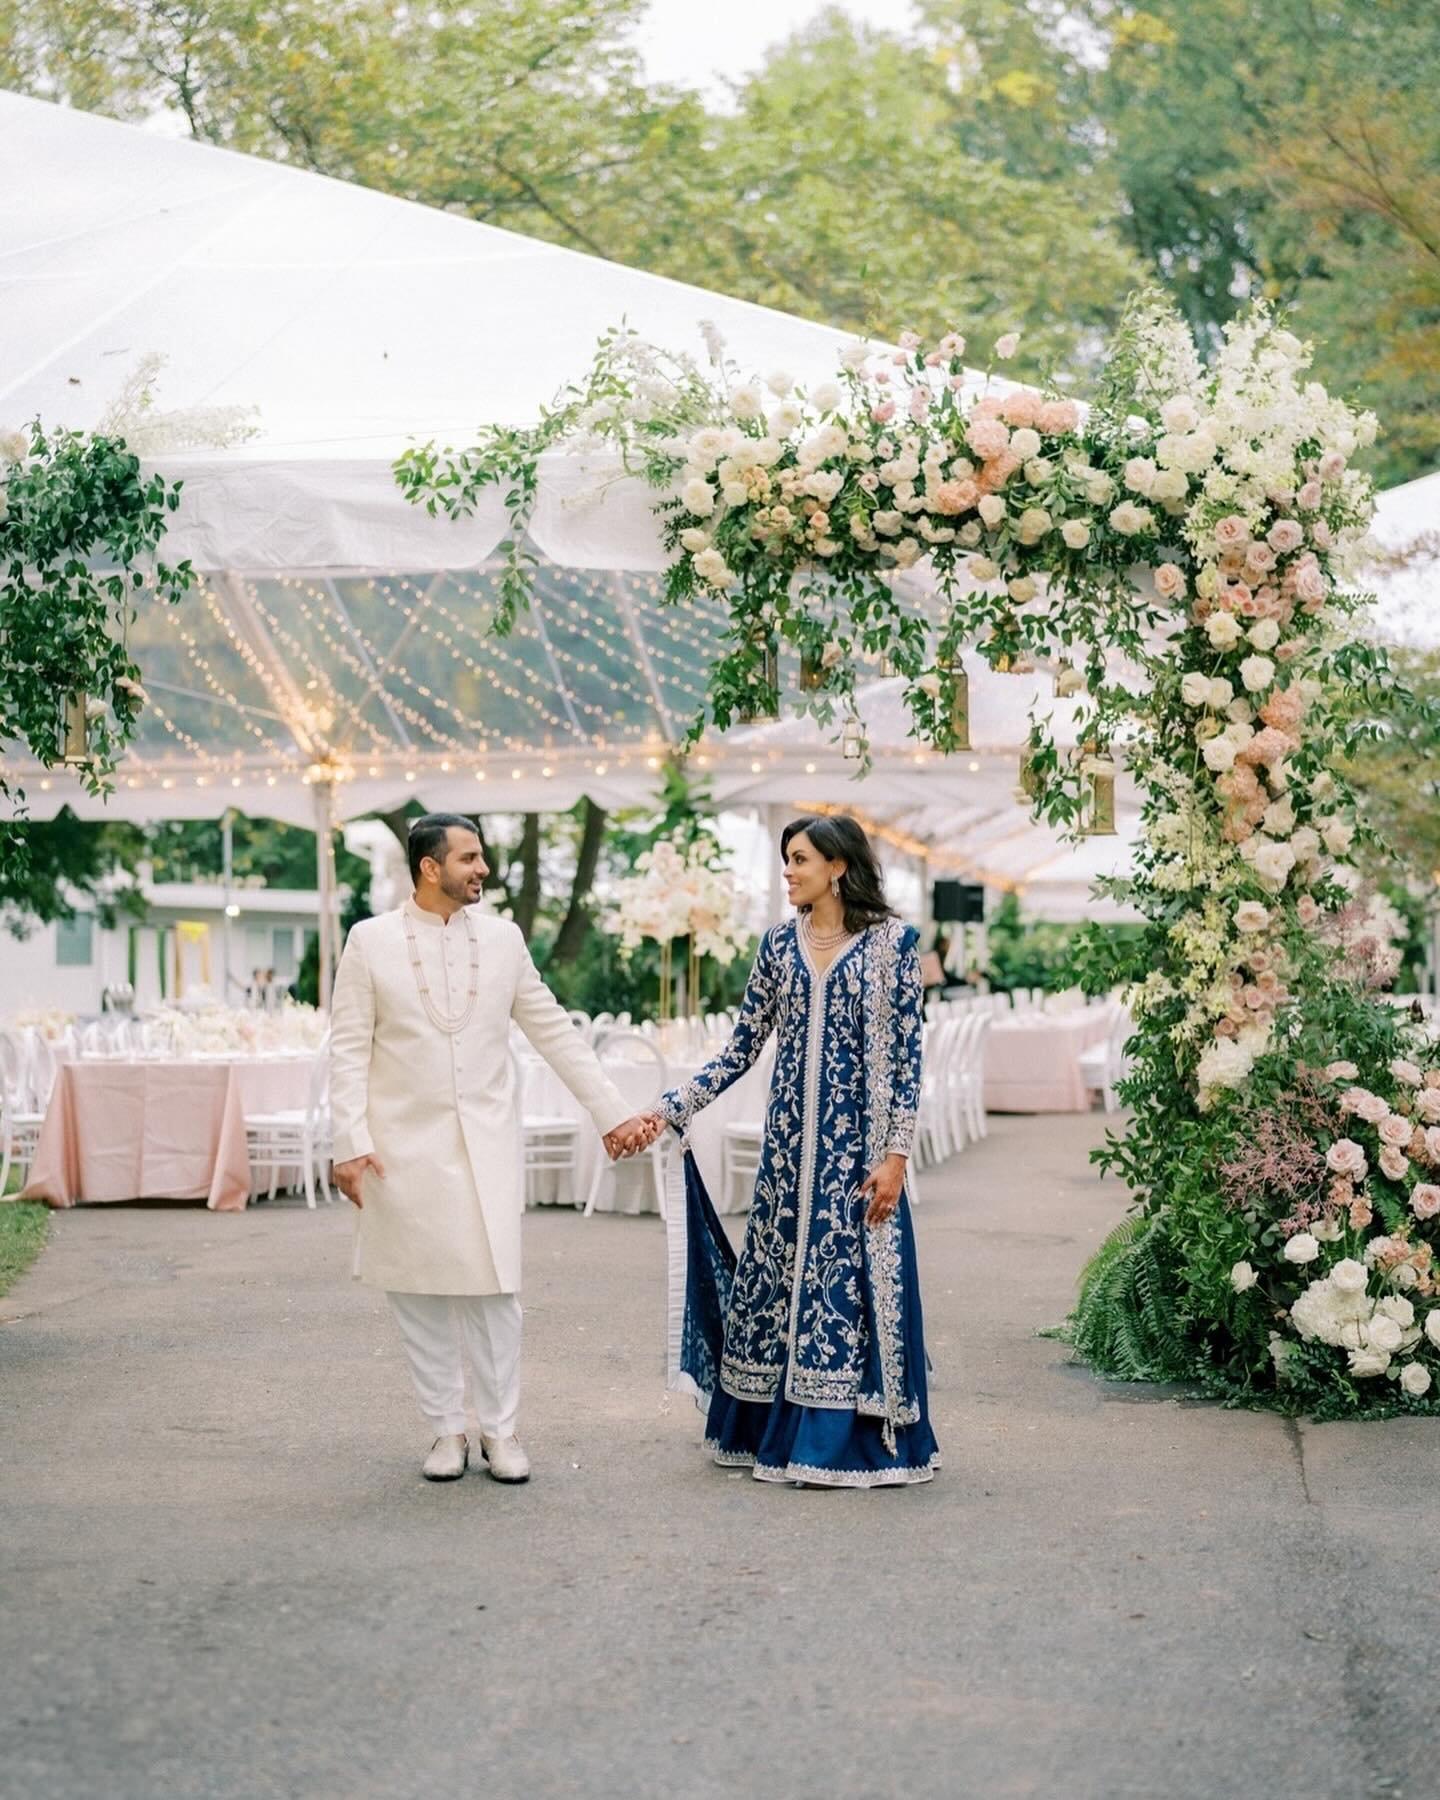 Day 2:  S+N&rsquo;s wedding design was the timeless elegance of blush and white hues, blossoming under a canopy of twinkling lights. The tent was adorned with breathtaking floral installations, each one a wow factor sure to leave guests breathless. 
